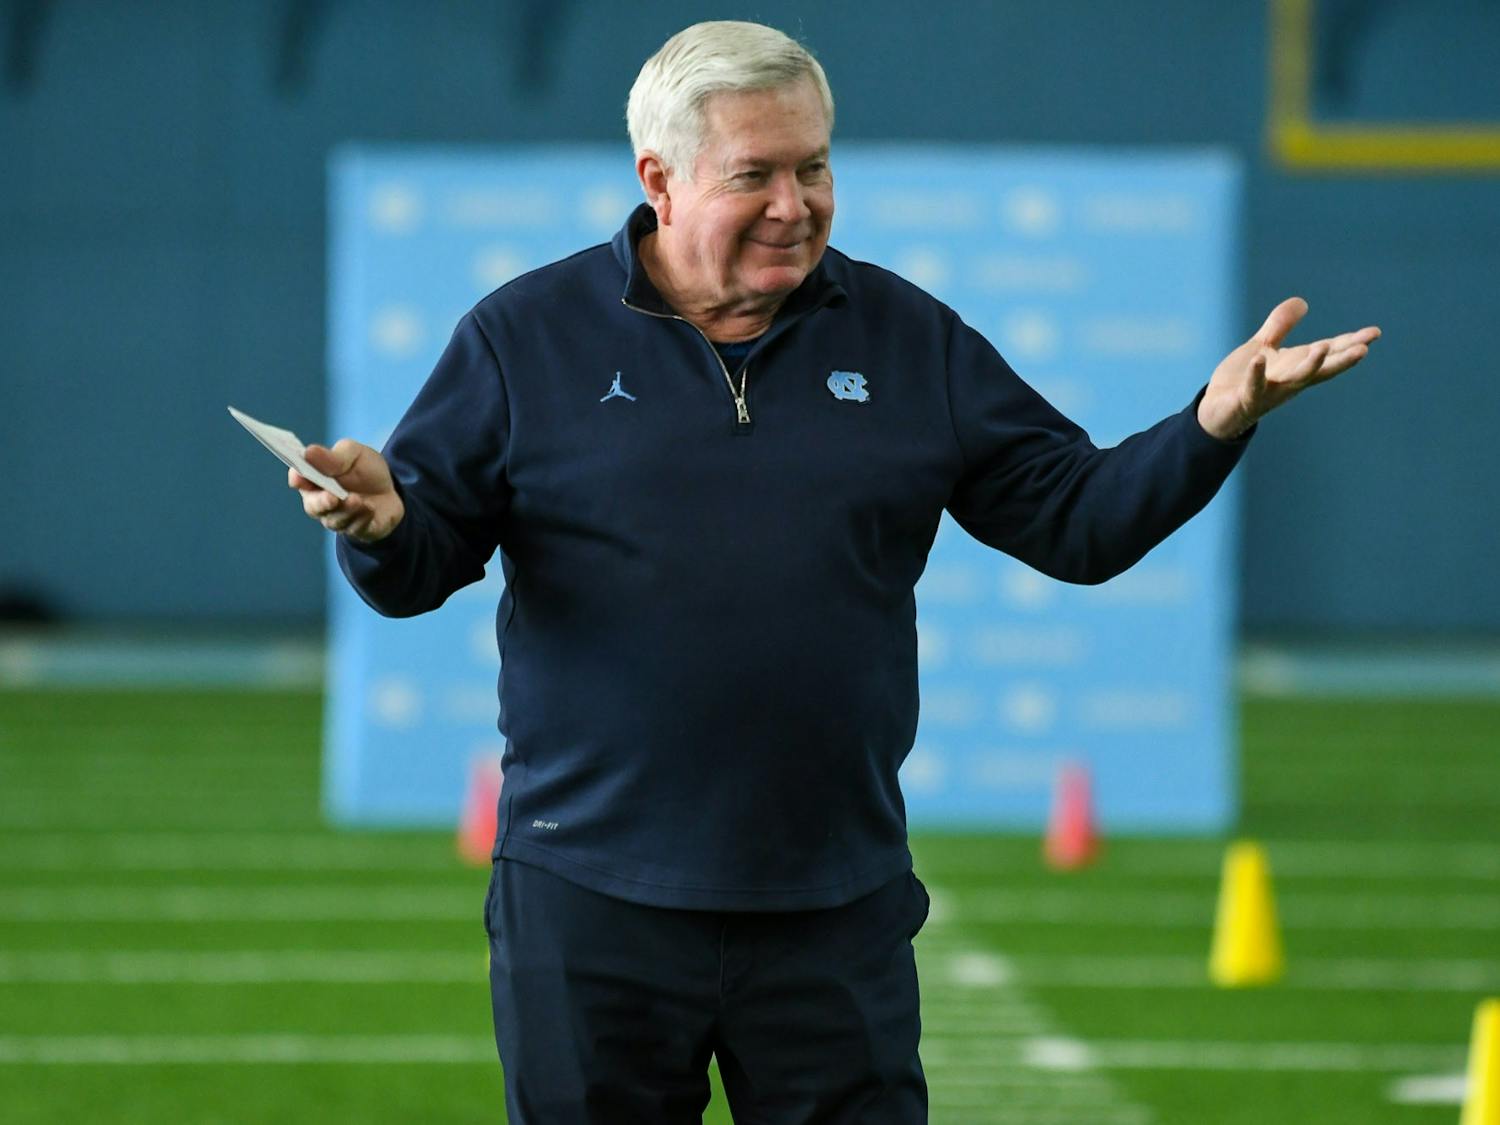 Mack Brown, head coach of North Carolina Football, addresses the NFL scouts in an opening speech during Pro Day on Monday, March 28, 2022. 